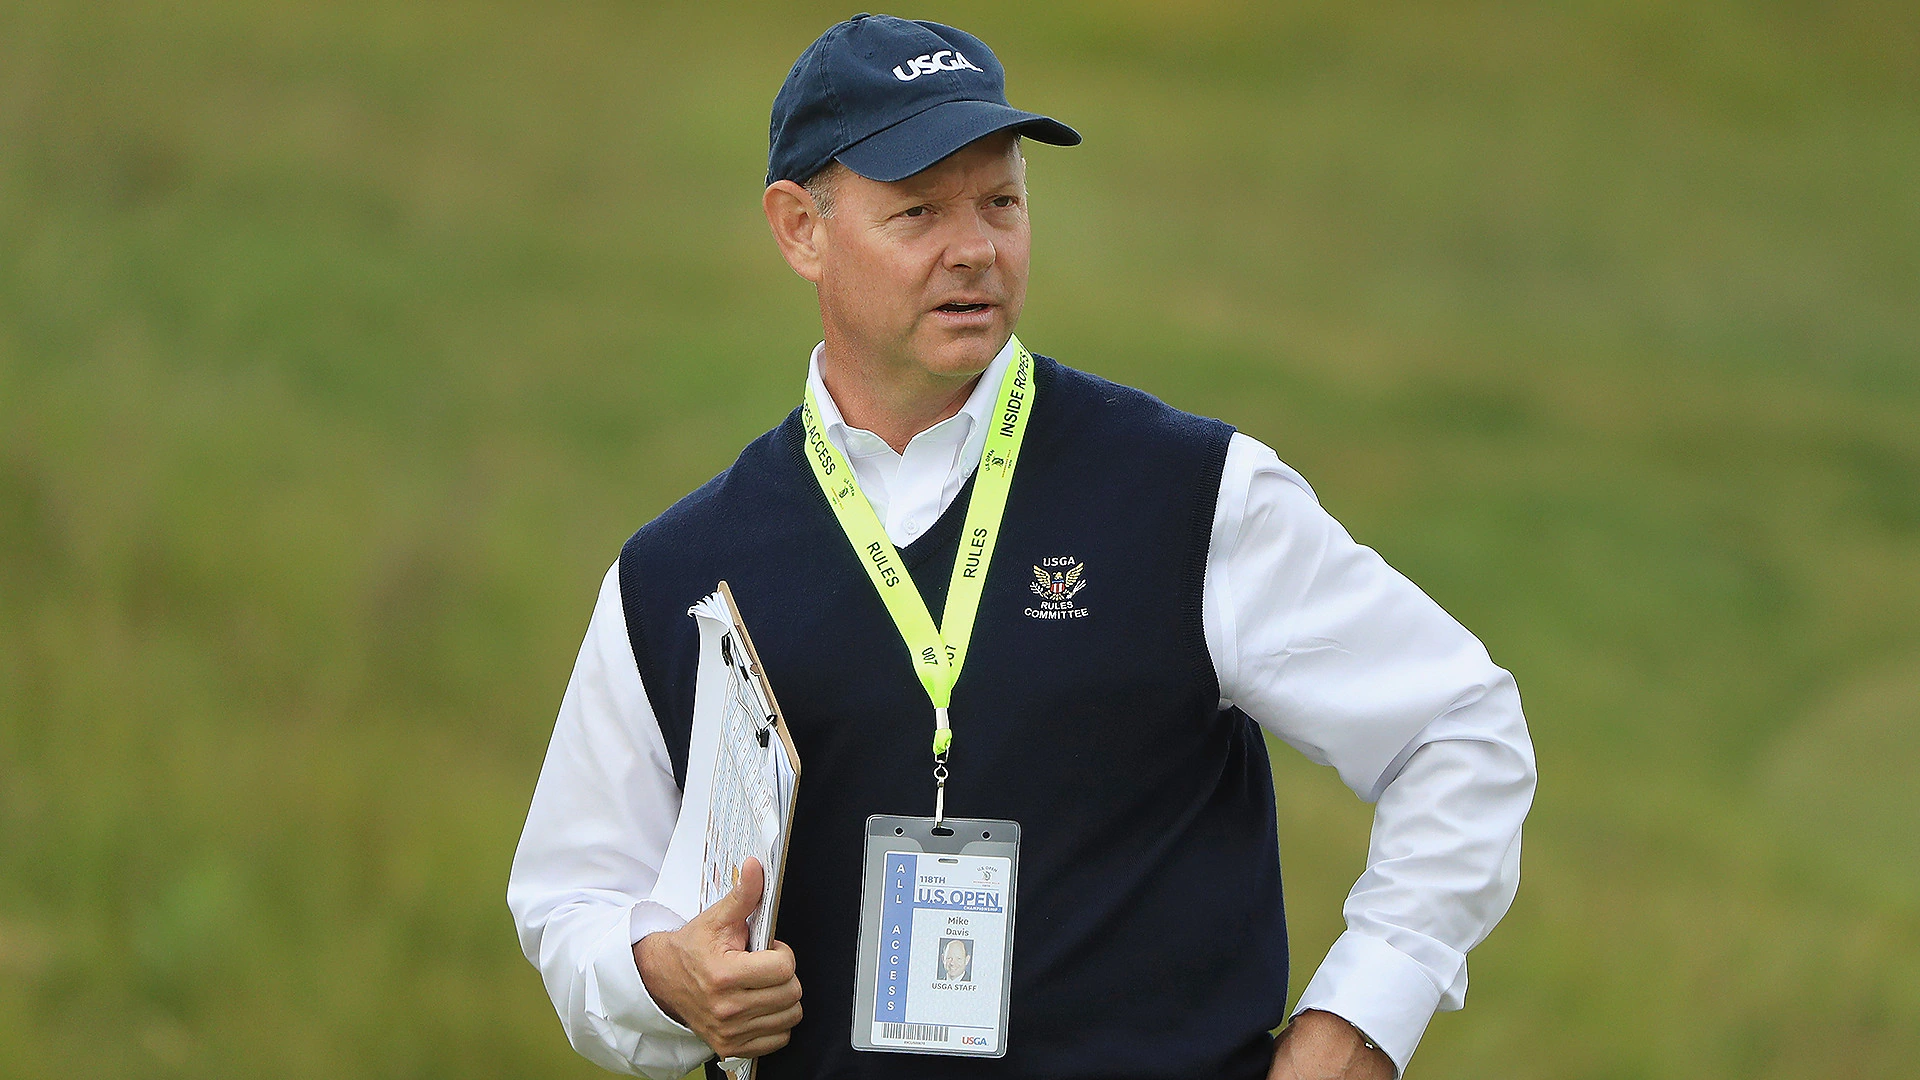 Mike Davis stepping down as USGA CEO at end of 2021 to design courses